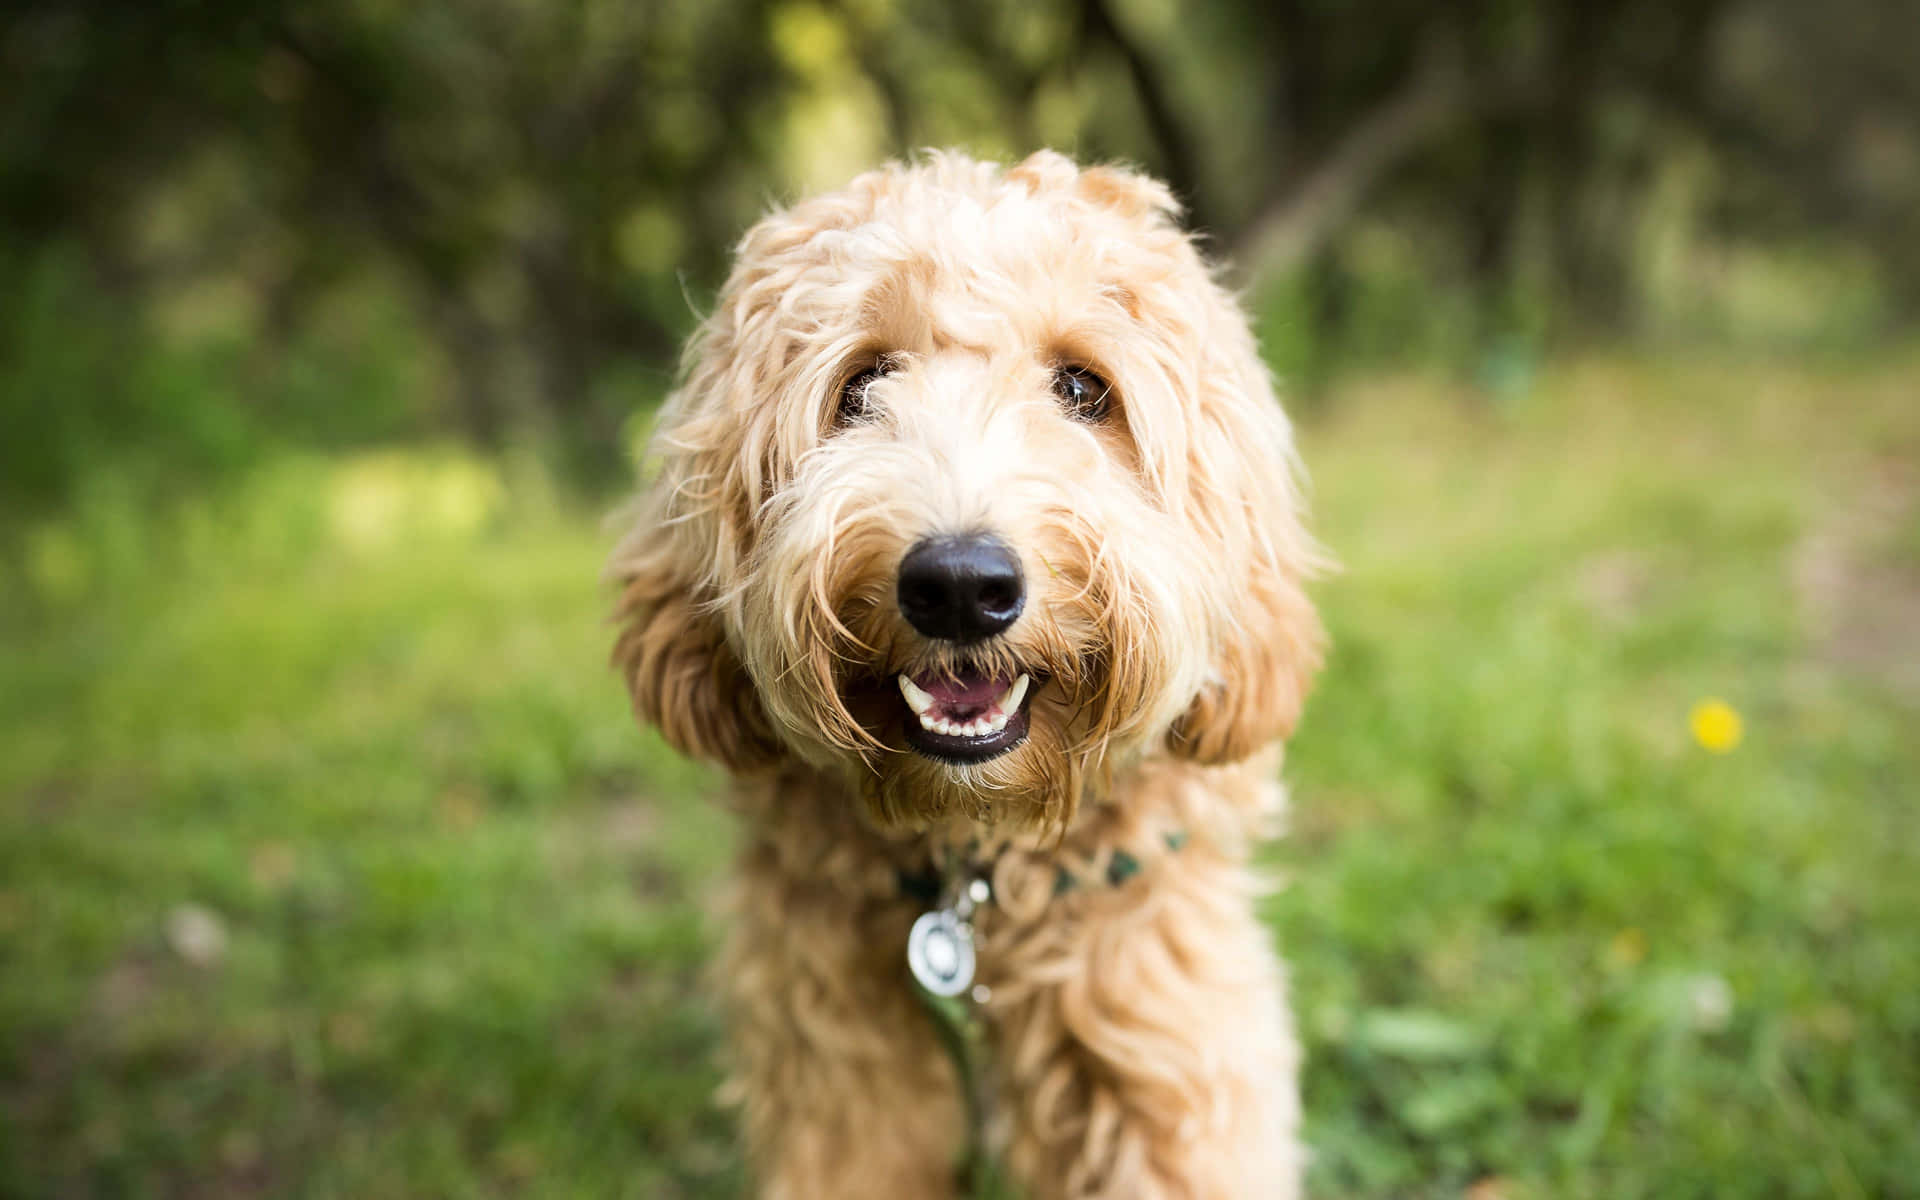 Adorable Labradoodle smiles wide with big, shining eyes!